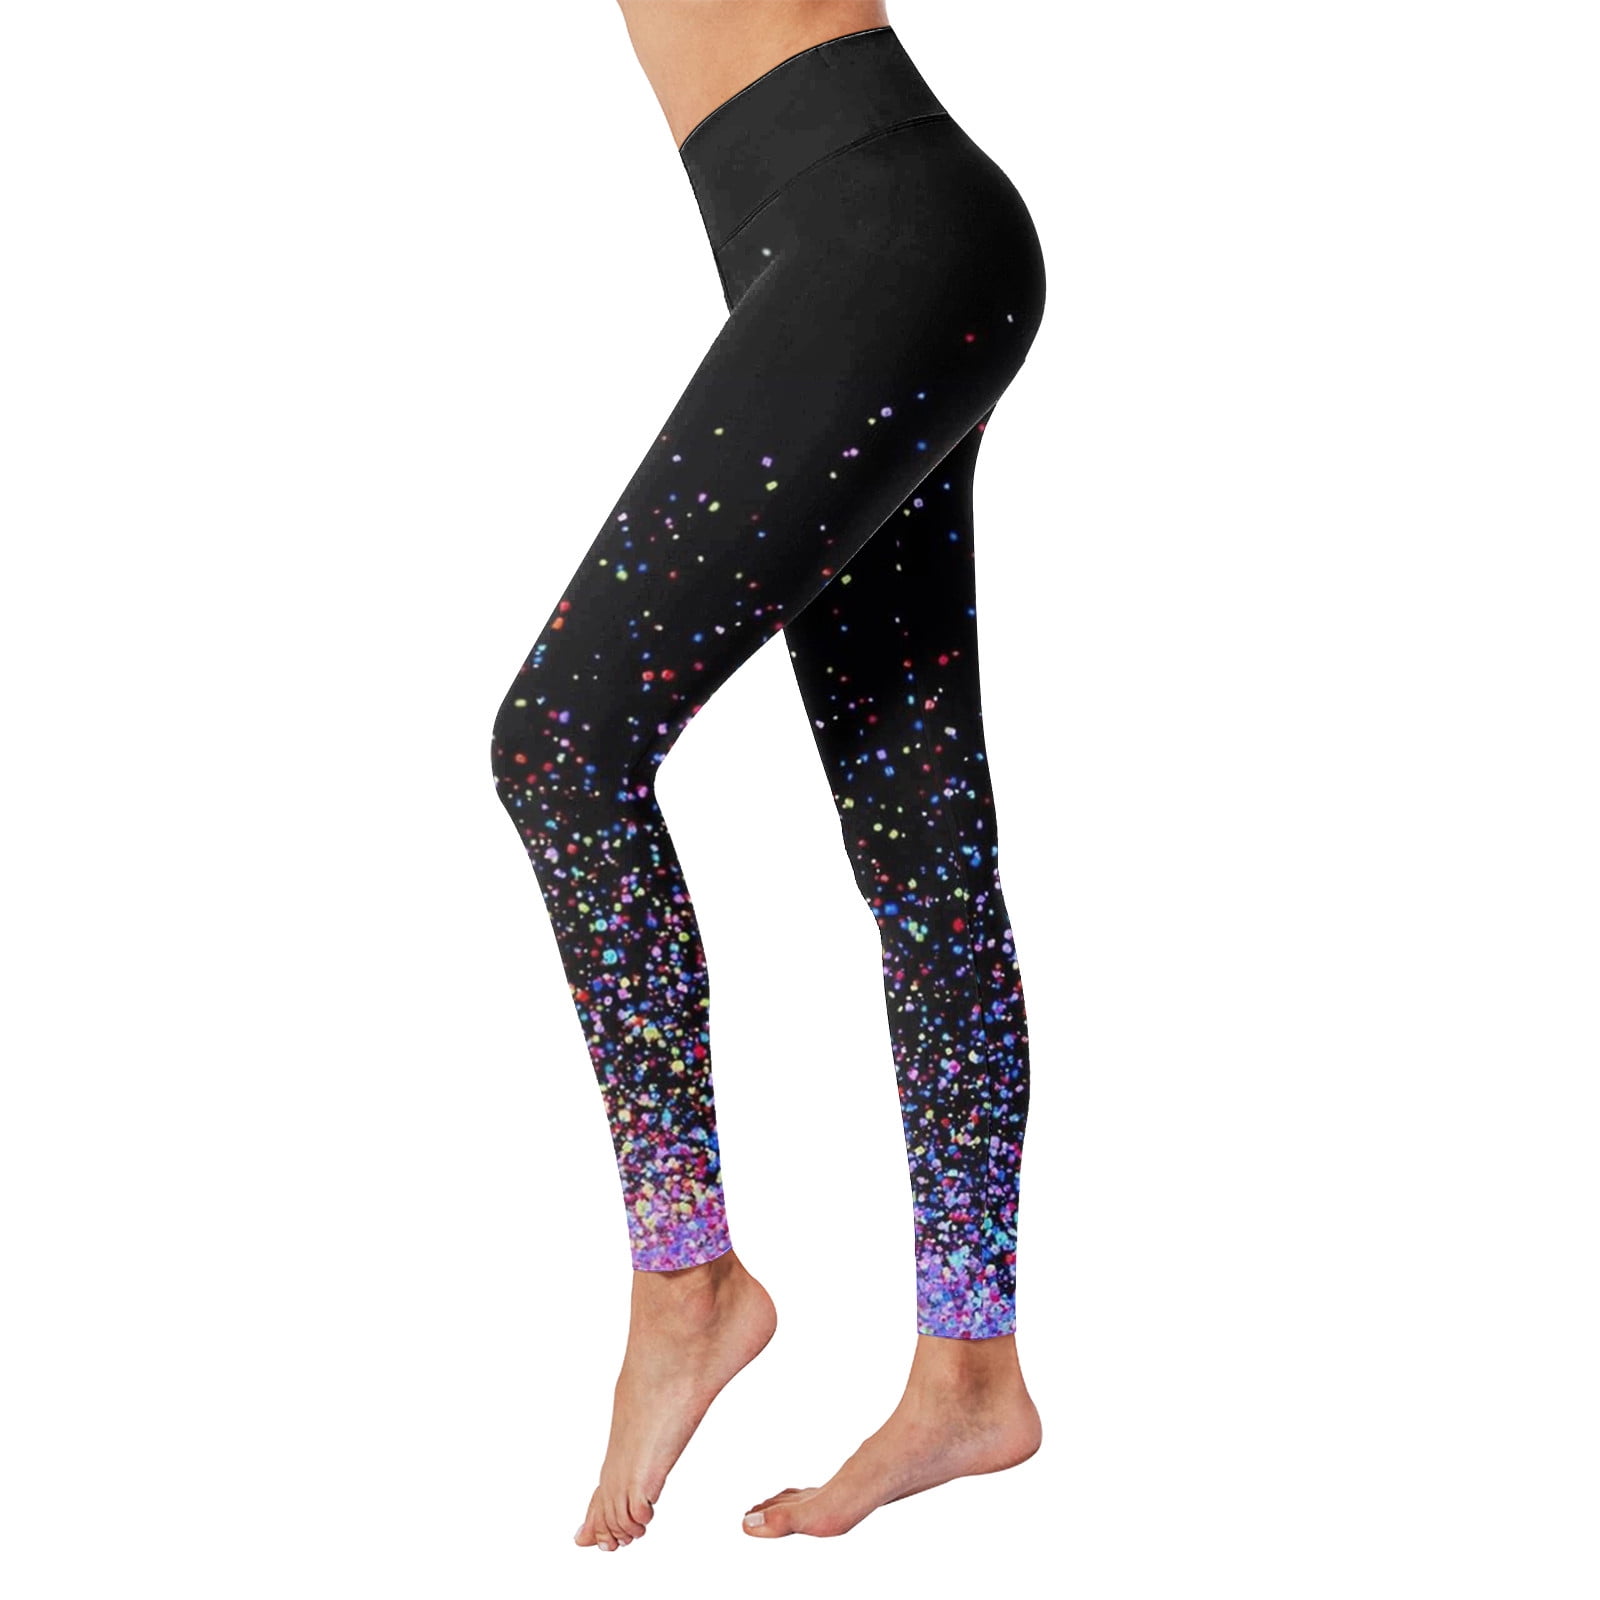 Seamless Tie Dye Leggings Women For Fitness Yoga Pants Push Up Workout  Sports Legging High Waist Tights Gym Ladies Clothing